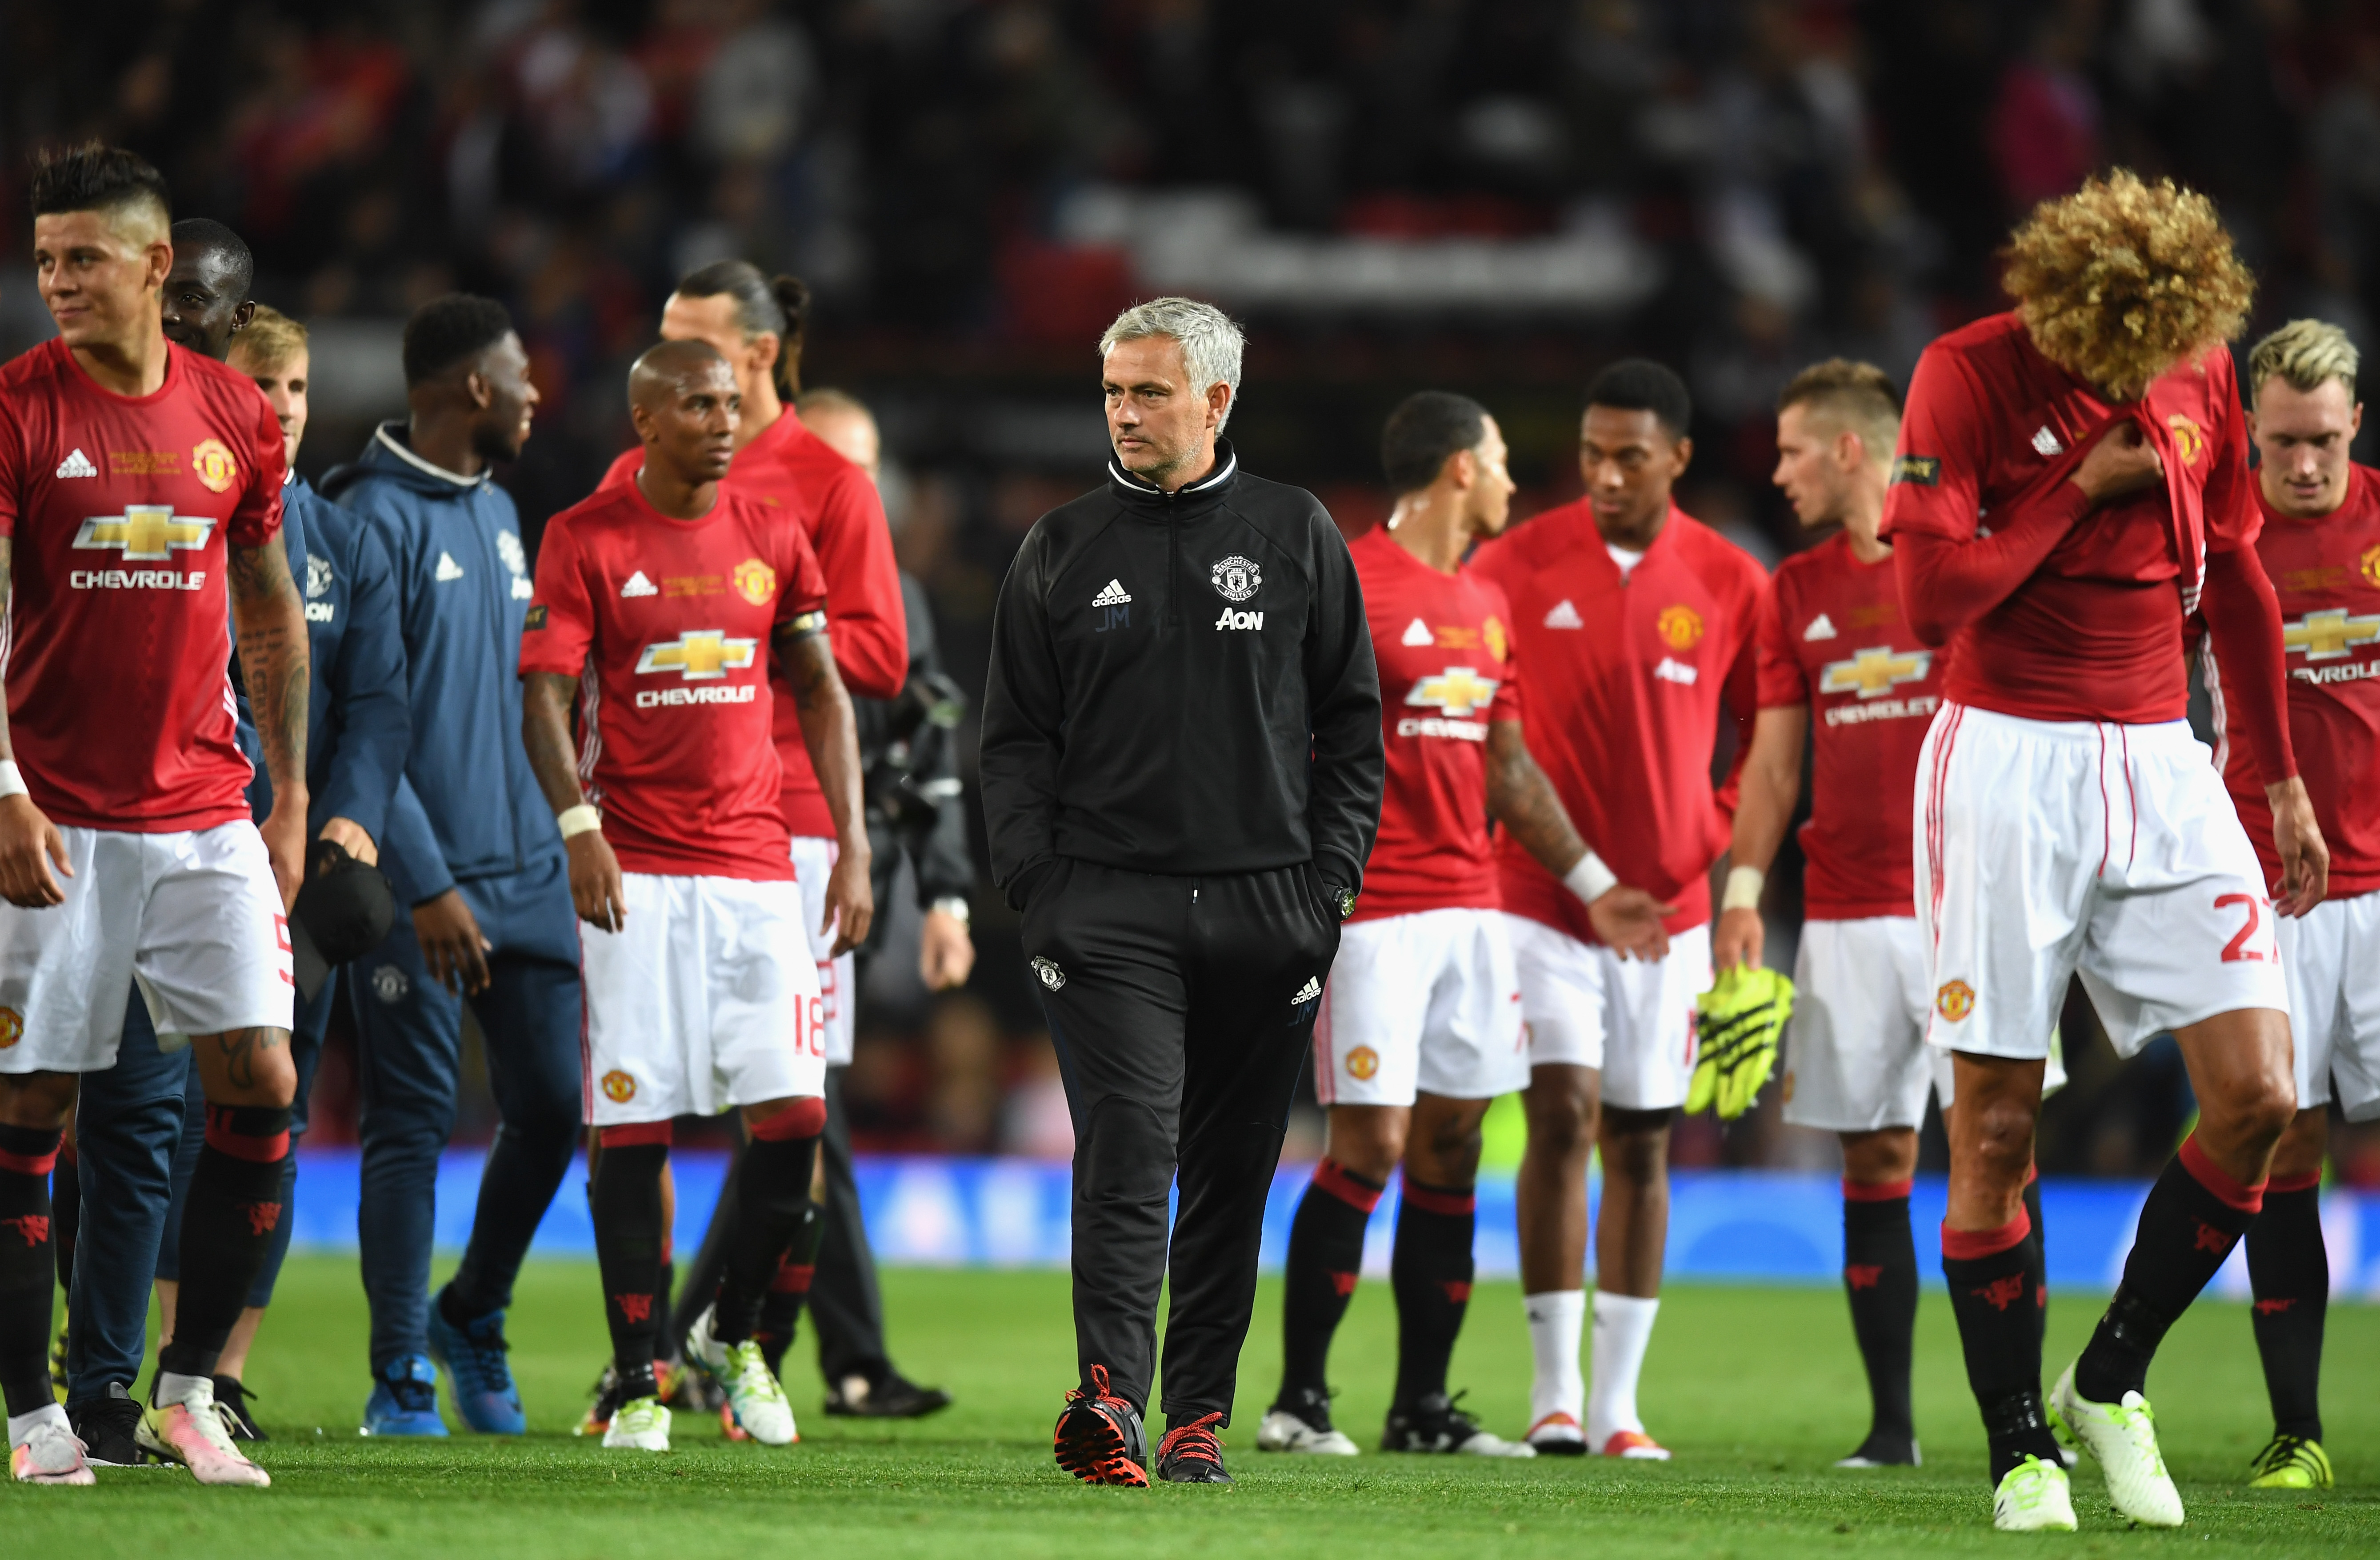 MANCHESTER, ENGLAND - AUGUST 03: Manager of Manchester United, Jose Mourinho and the Manchester United squad look on following the Wayne Rooney Testimonial match between Manchester United and Everton at Old Trafford on August 3, 2016 in Manchester, England.  (Photo by Michael Regan/Getty Images)